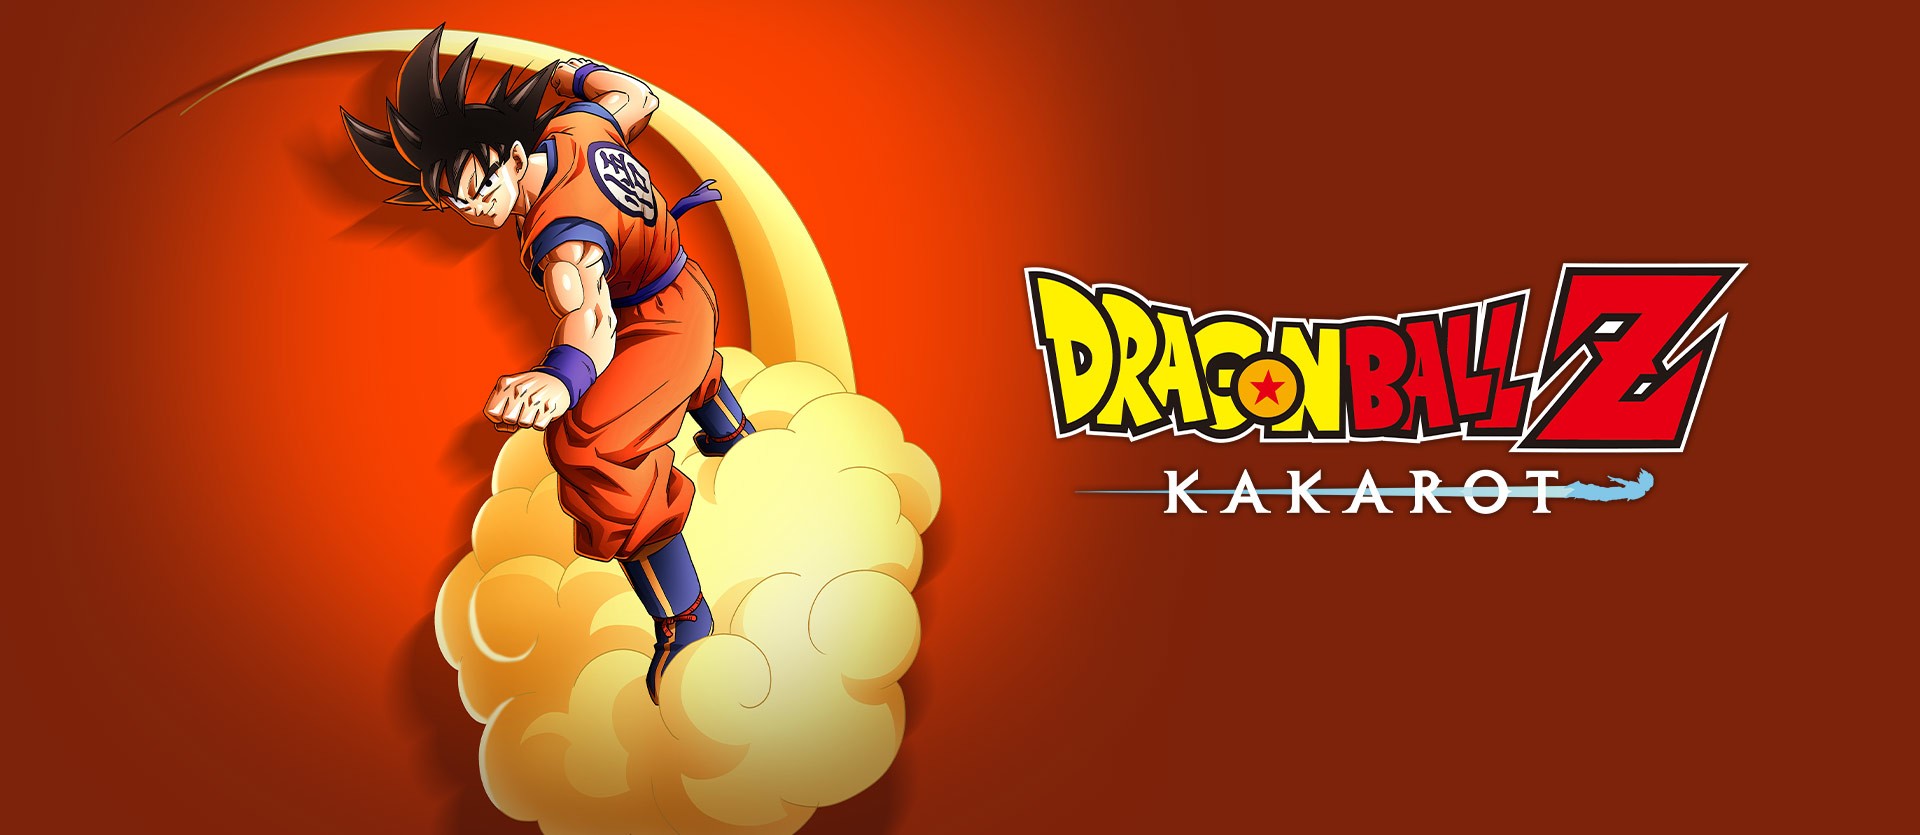 Dragon Ball Super - Manga BR Apk Download for Android- Latest